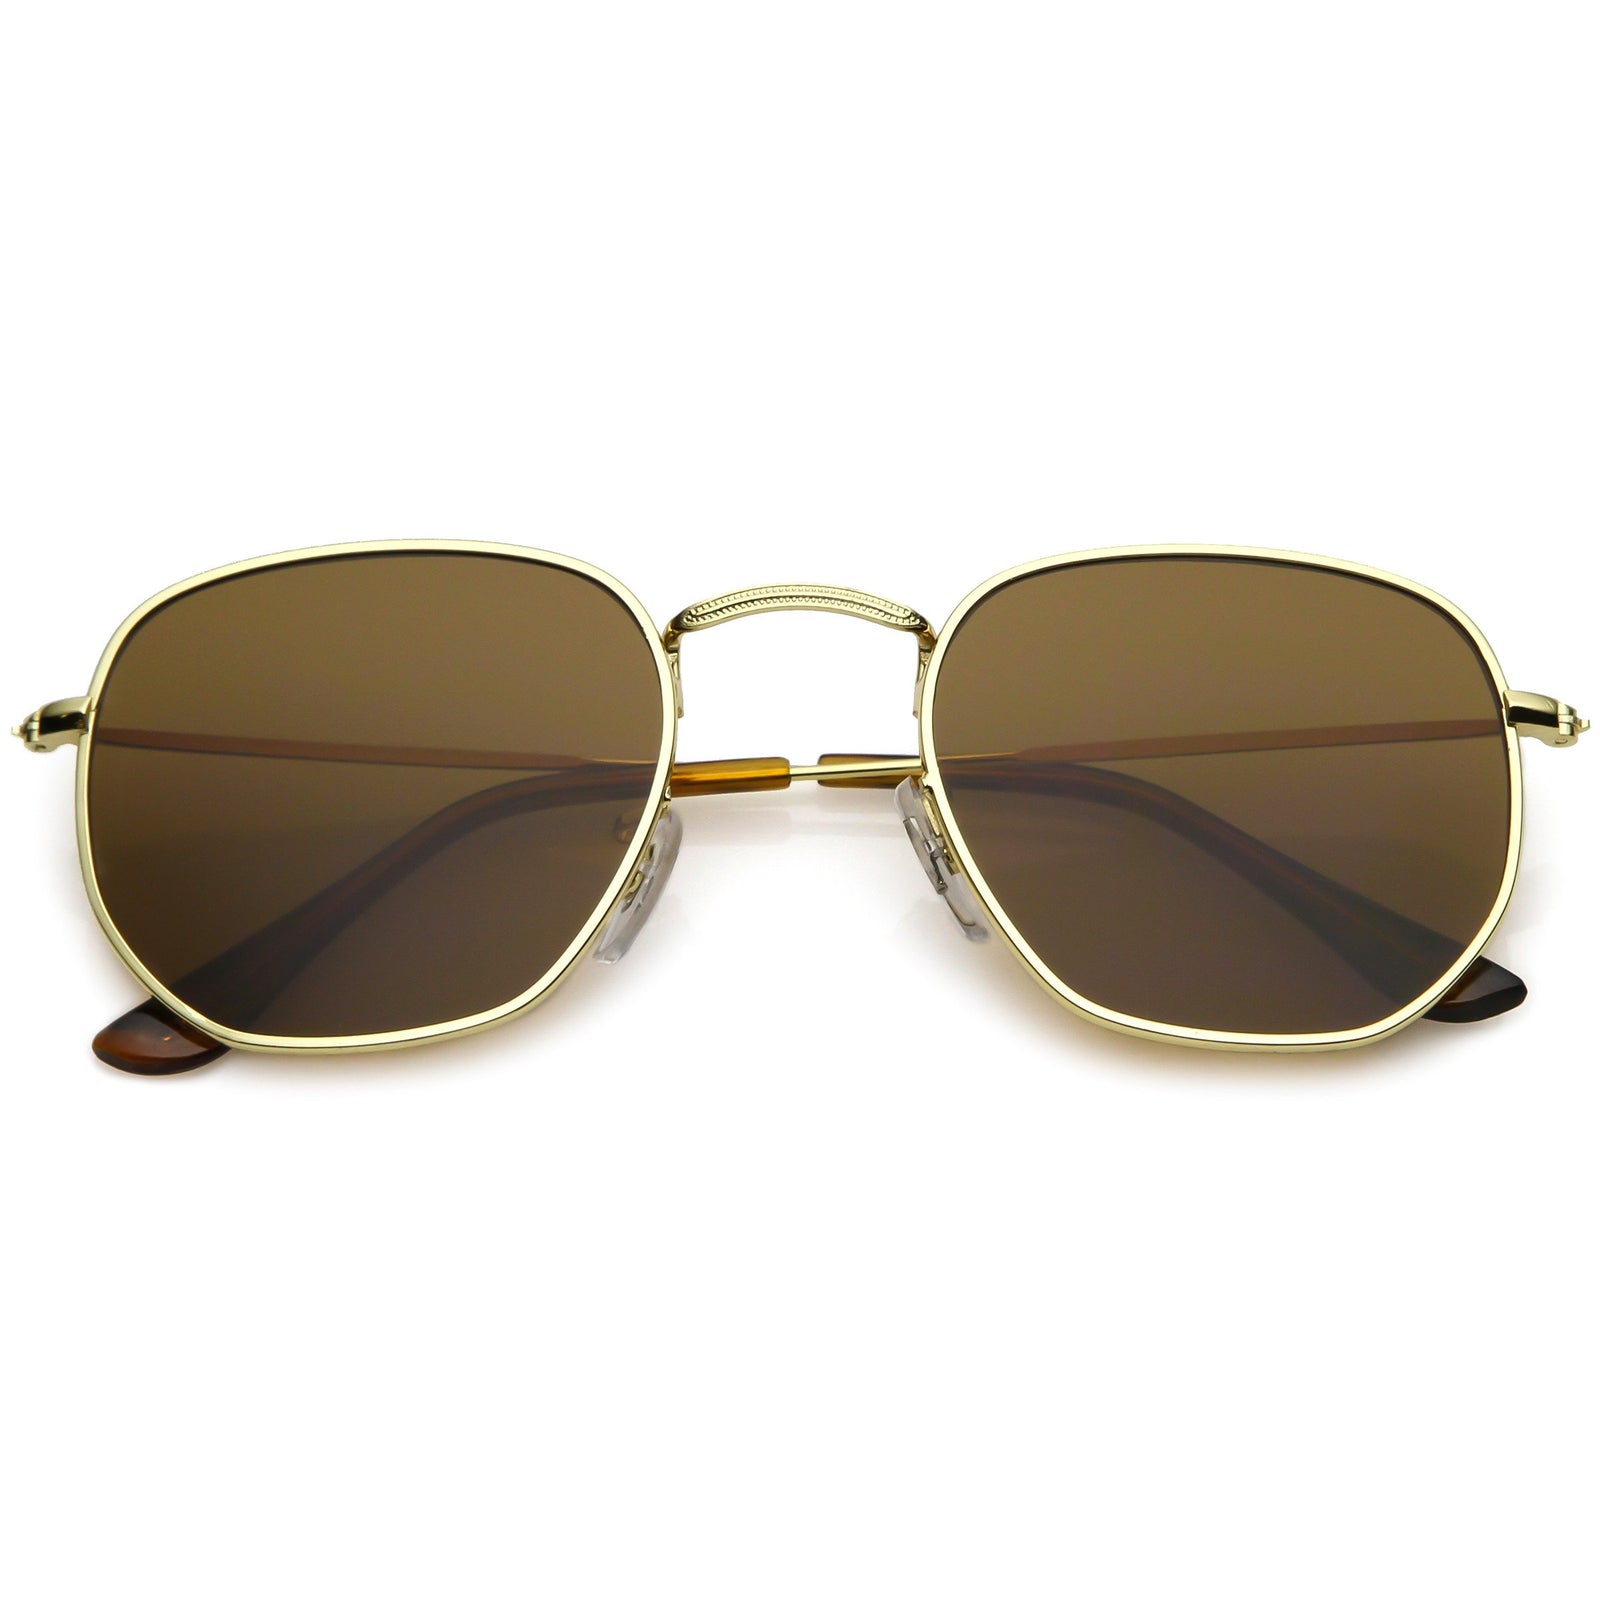 Retro Hipster Indie Sunglasses Page 3 - zeroUV